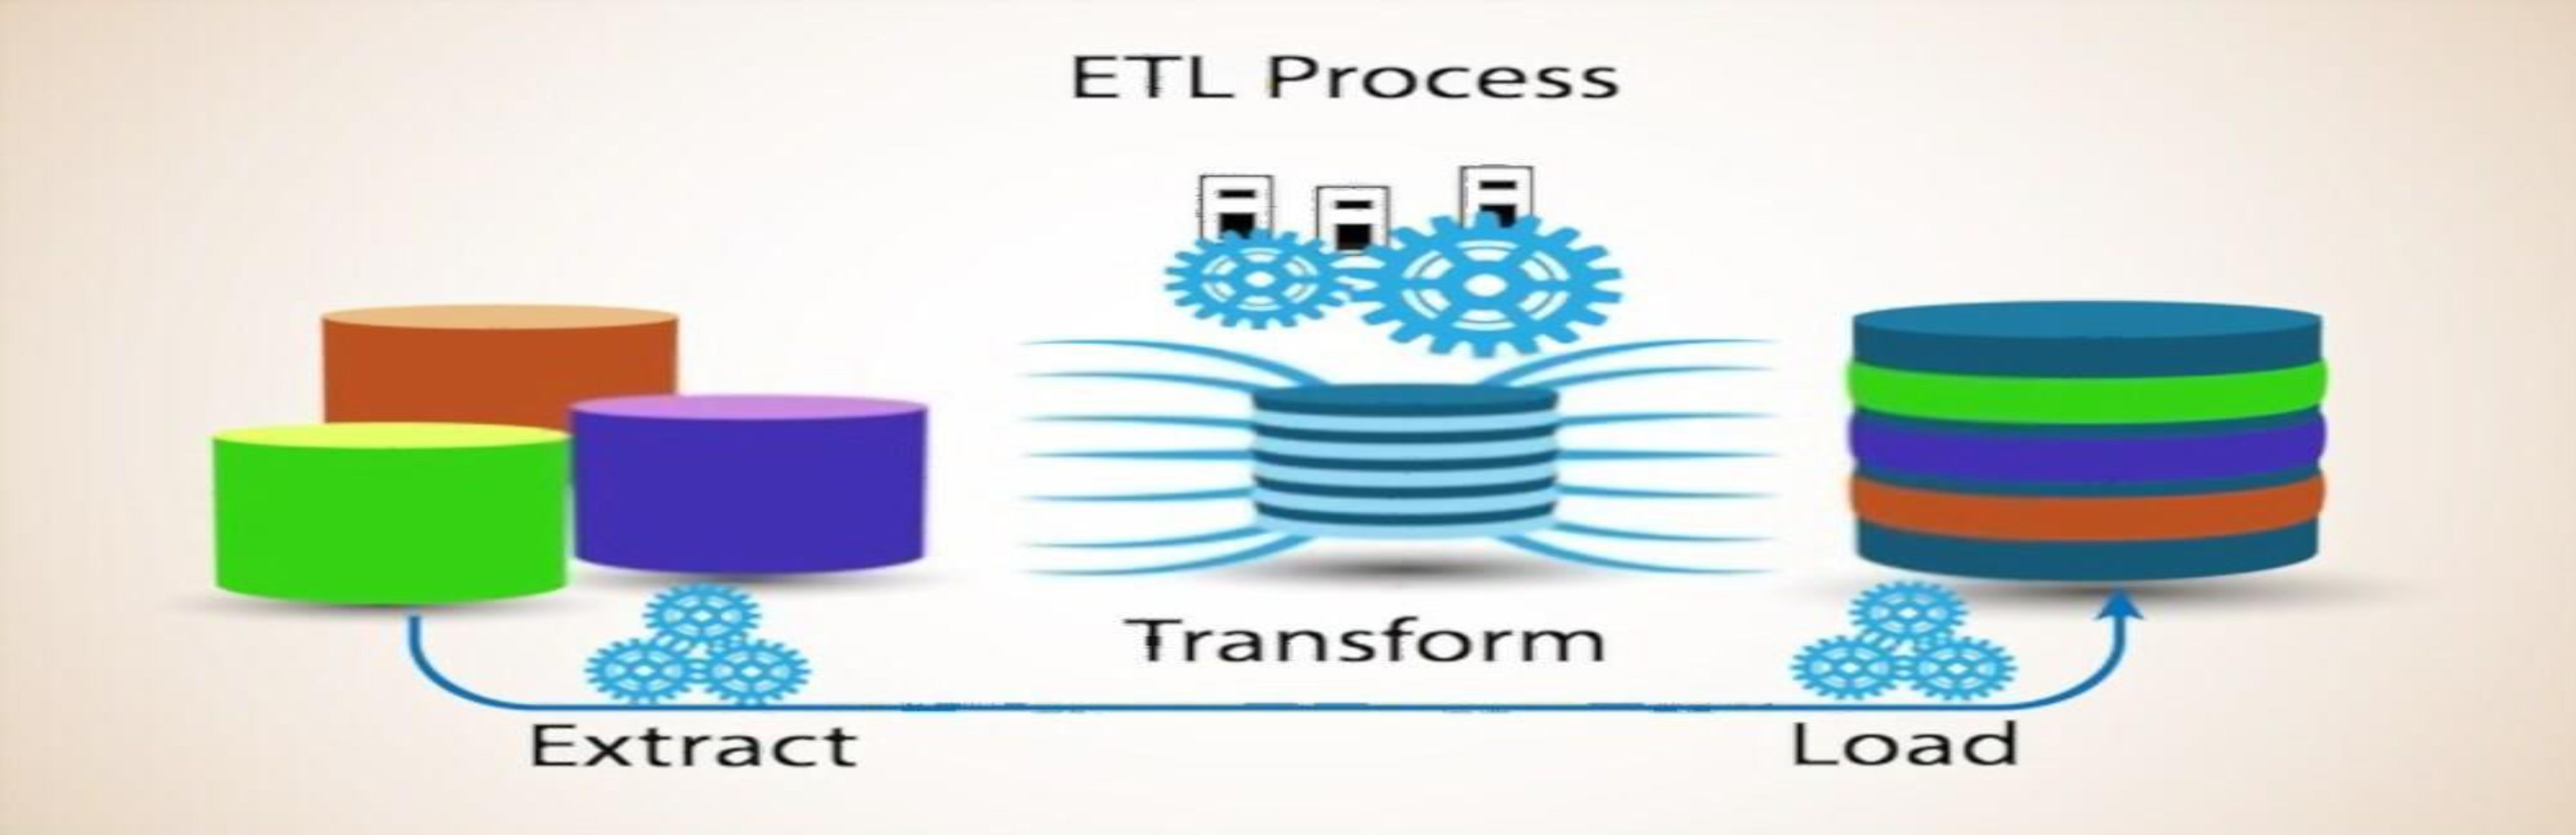 Ways To Improve Your Business With The ETL Process